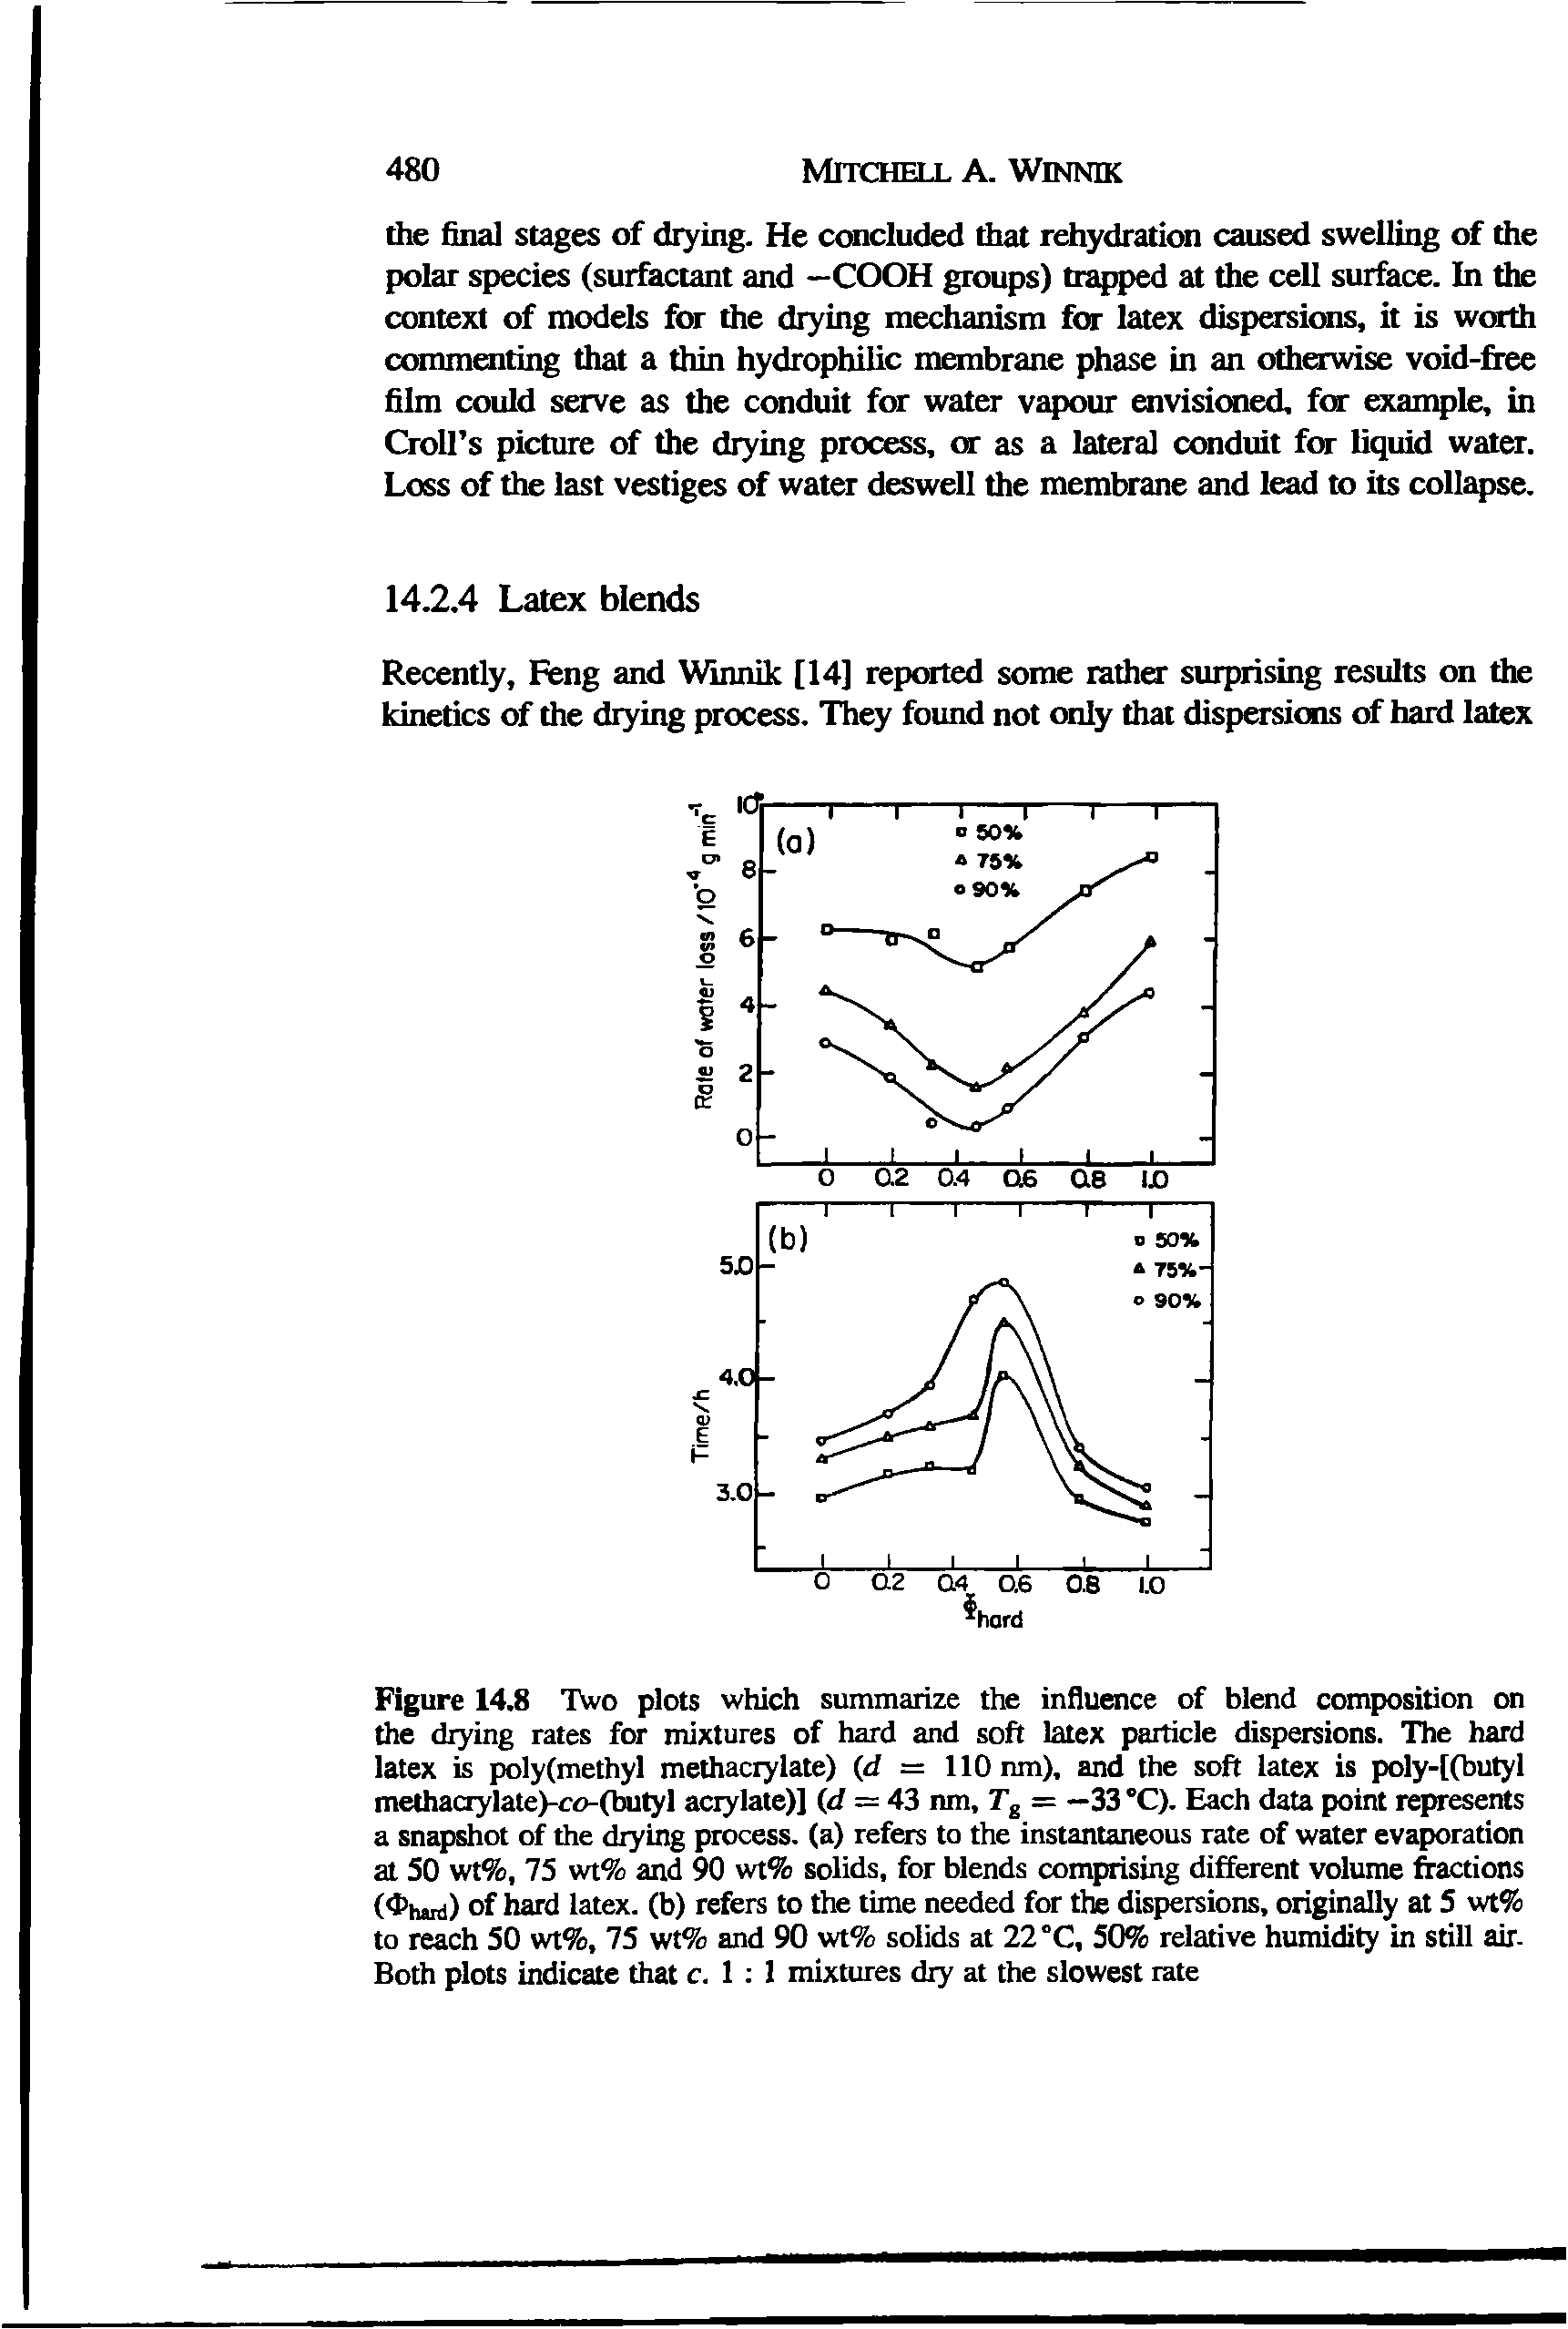 Figure 14.8 Two plots which summarize the influence of blend composition on the drying rates for mixtures of hard and soft latex particle dispersions. The hard latex is poly (methyl methacrylate) (d = 110 nm), and the soft latex is poly-[(butyl methacrylate) o-(hutyl acrylate)] (d = 43 nm, Tg = —33 C). Each data point represents a snapshot of the drying process, (a) refers to the instantaneous rate of water evaporadon at SO wt%, 7S wt% and 90 wt% solids, for blends cotiprising different volume fracdons (4 hud) of hard latex, (b) refers to the time needed for the dispersions, originally at S wt% to reach SO wt%, 7S wt% and 90 wt% solids at 22 °C, 50% reladve humidity in sdll air. Both plots indicate that c. 1 1 mixtures dry at the slowest rate...